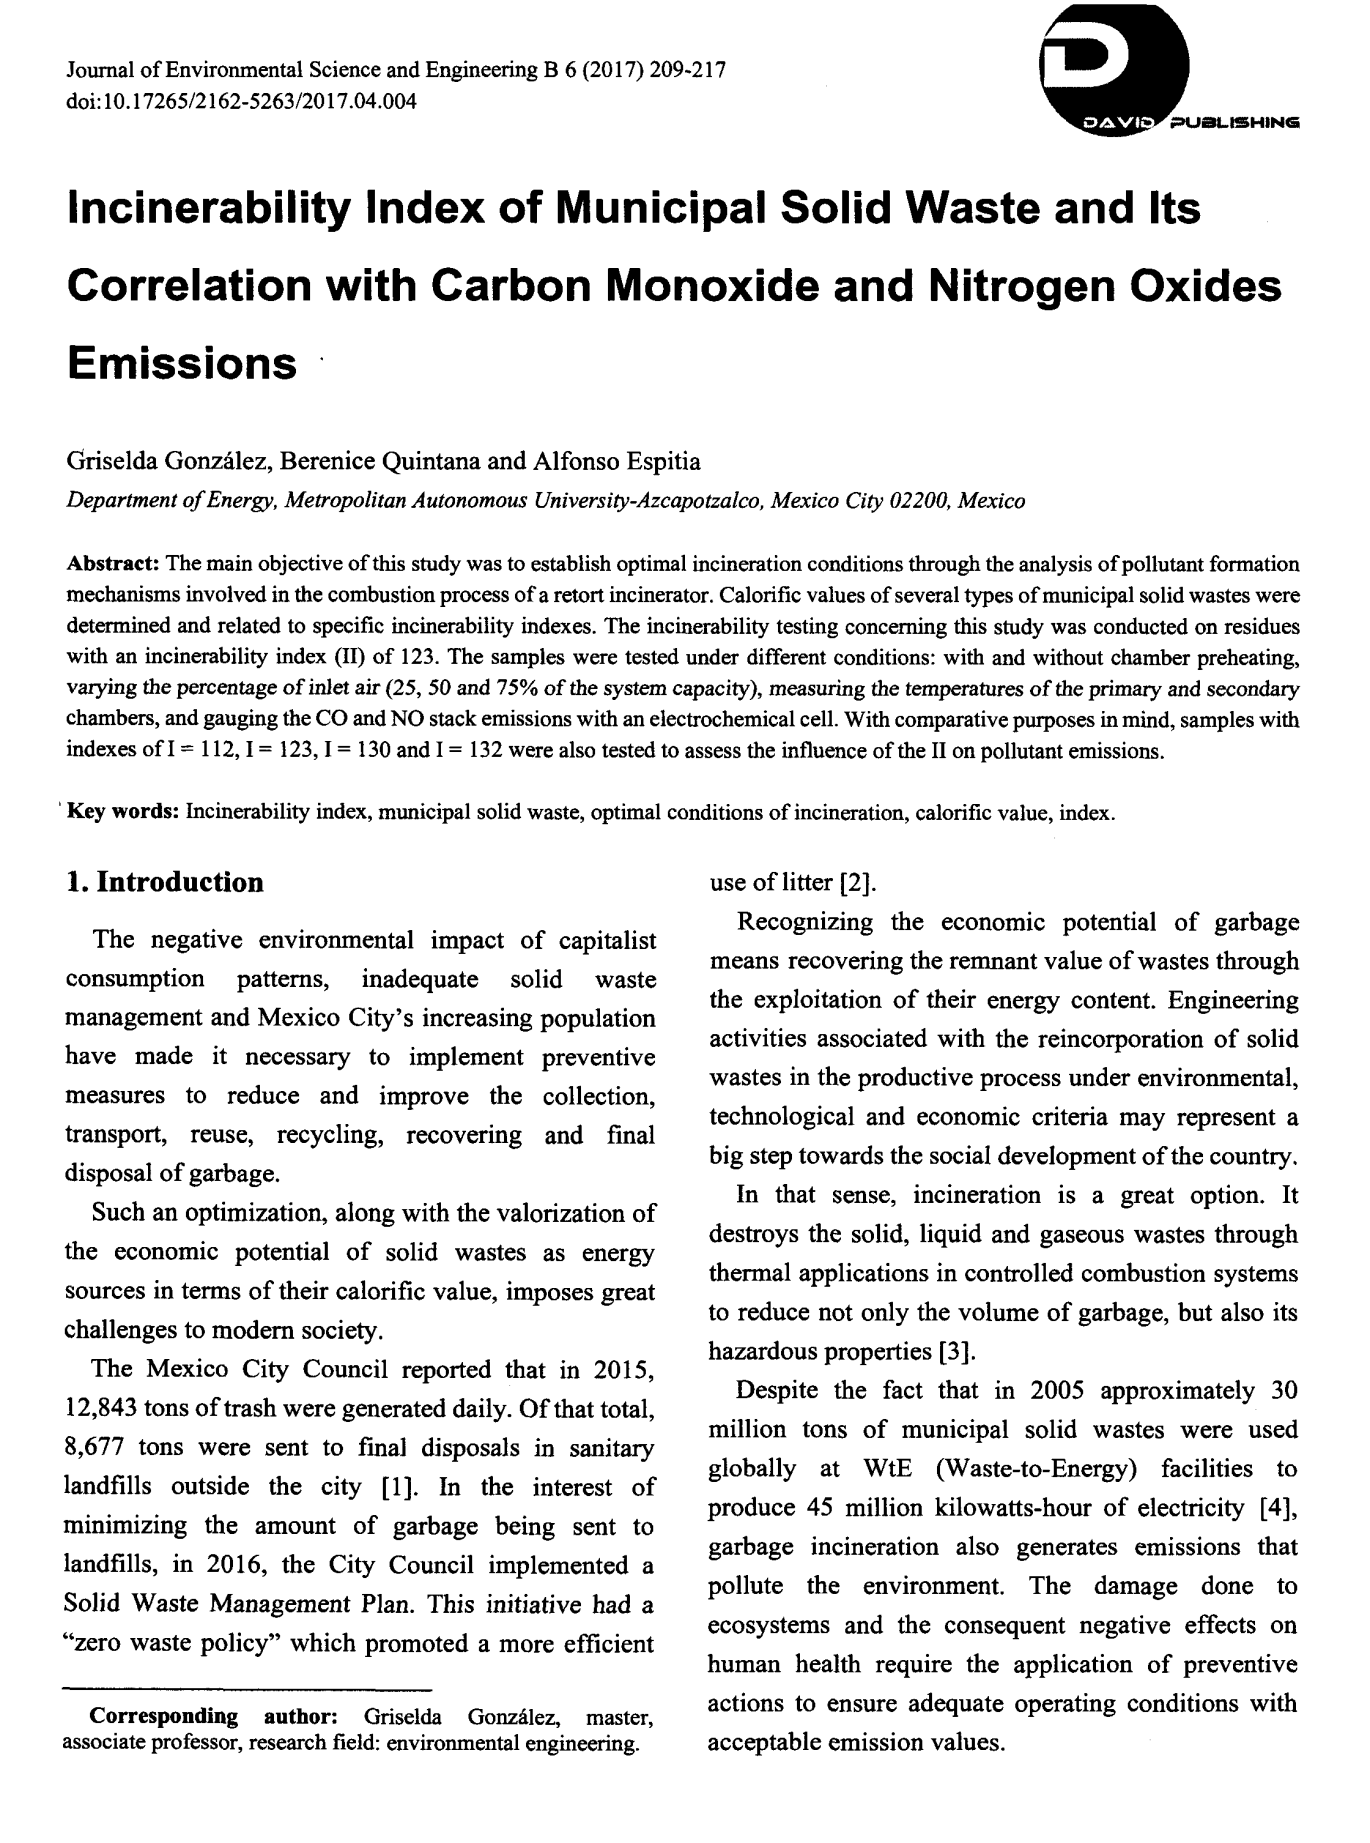 Incinerability Index of Municipal Solid Waste and Its Correlation with Carbon Monoxide and